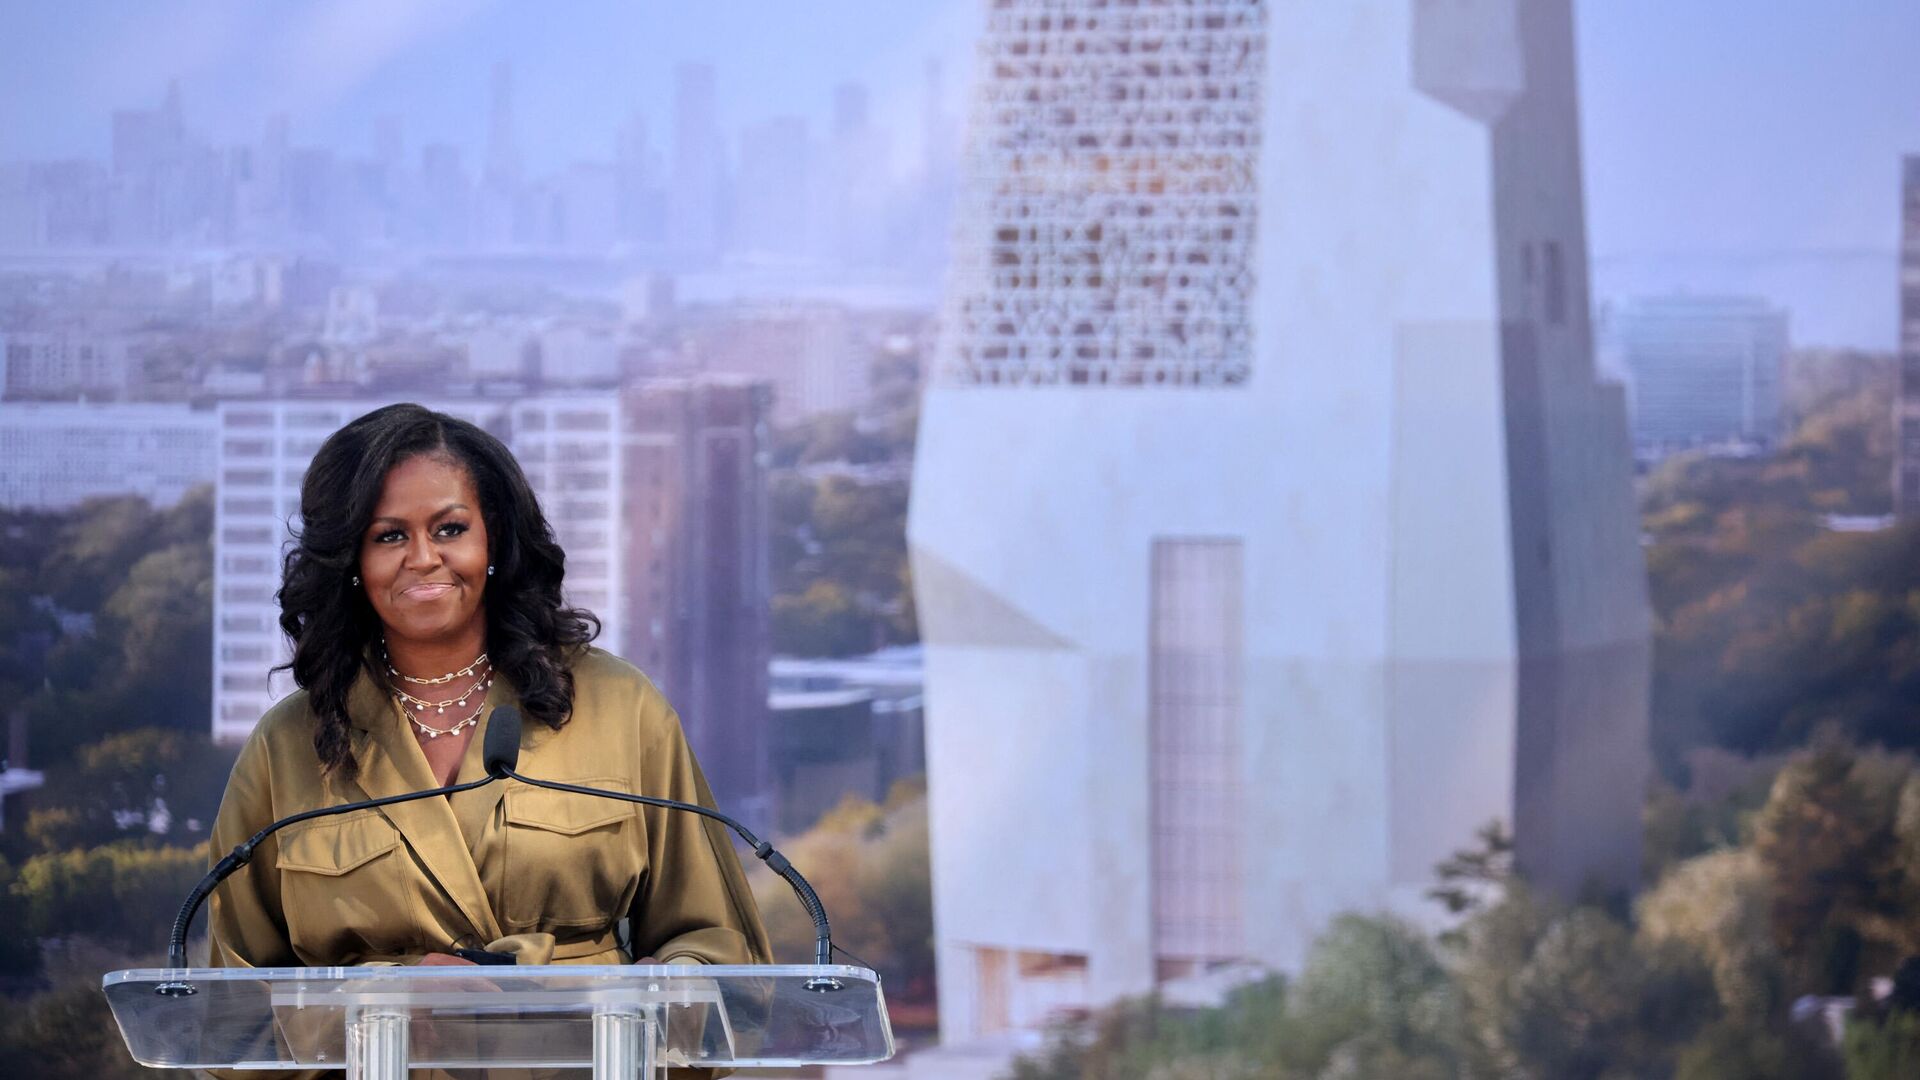 Former first lady Michelle Obama speaks during a ceremonial groundbreaking at the Obama Presidential Center in Jackson Park on September 28, 2021 in Chicago, Illinois - Sputnik International, 1920, 03.04.2022